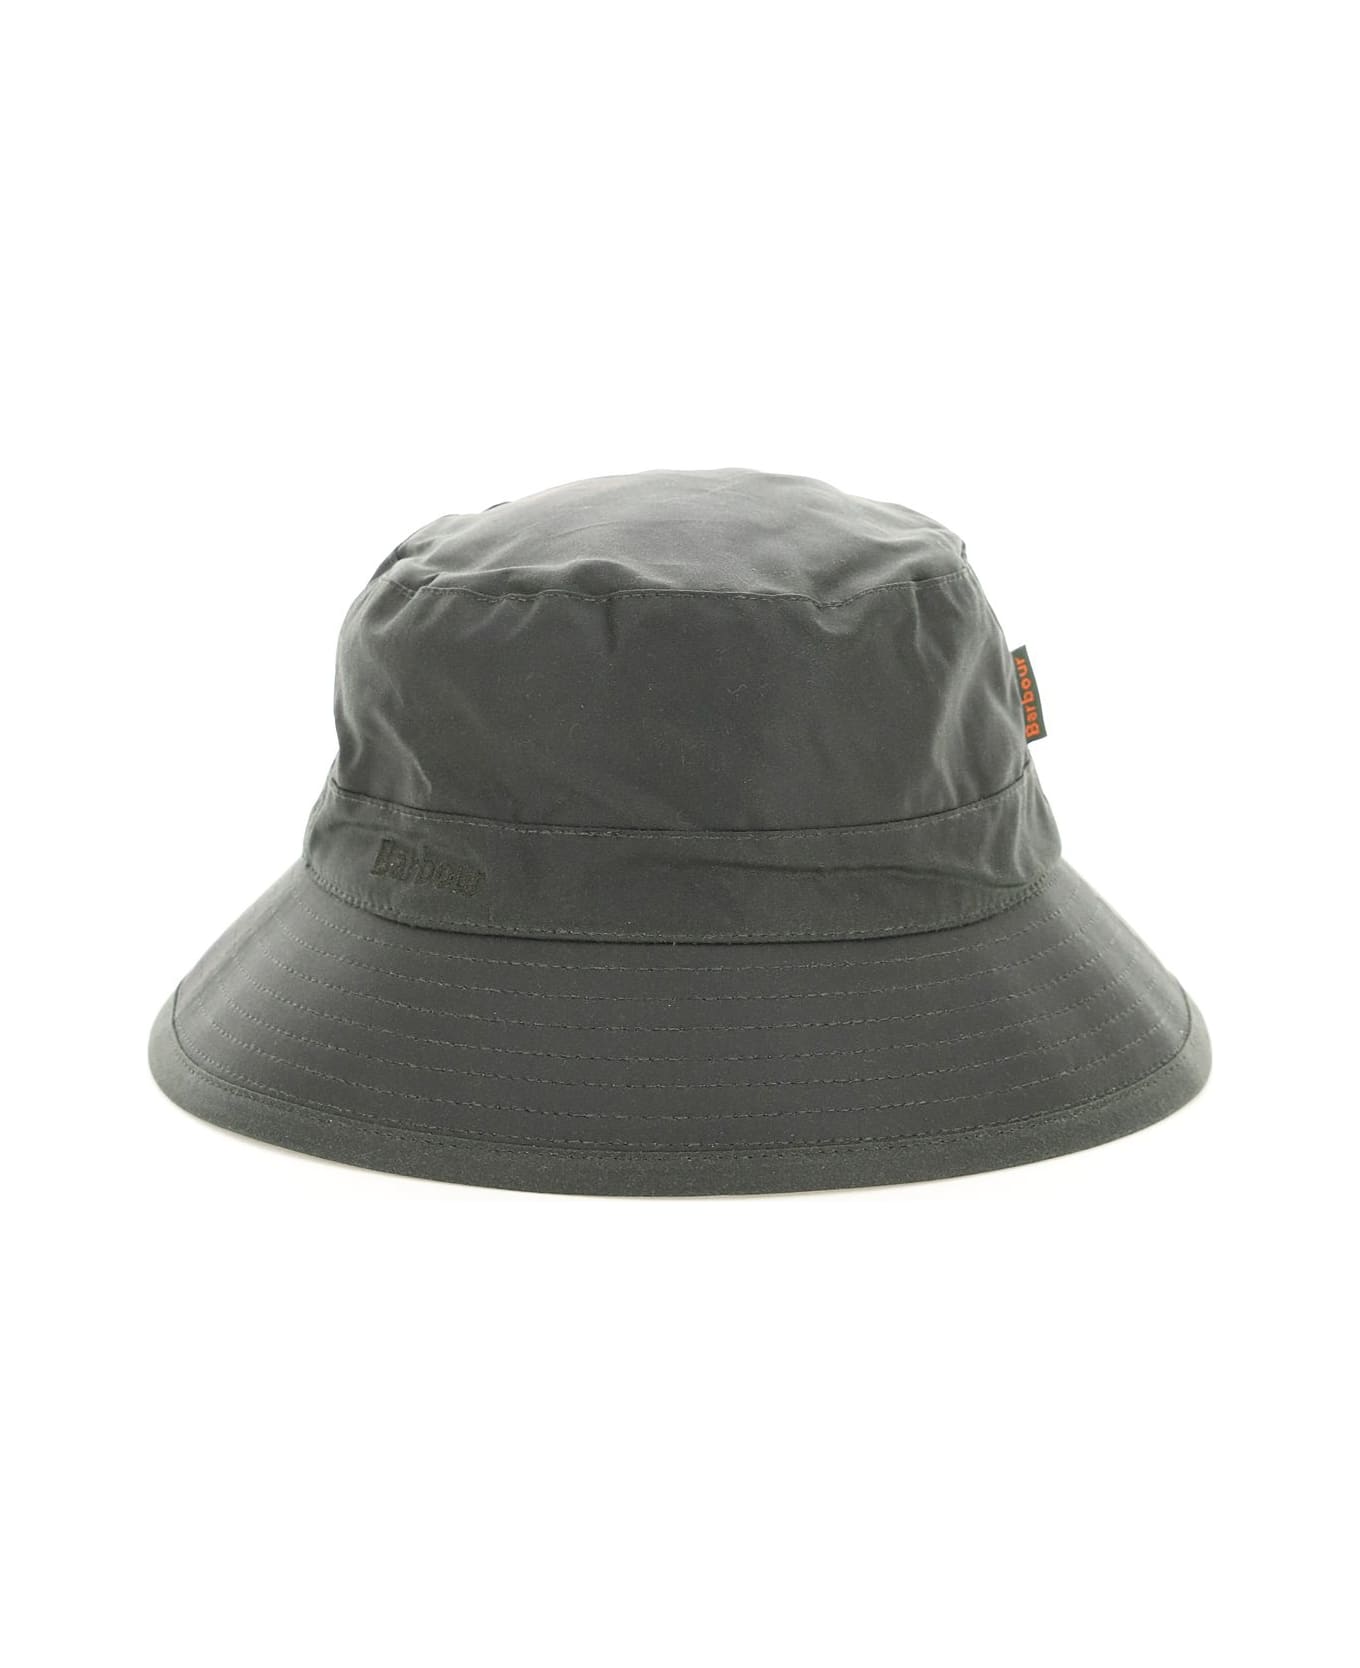 Barbour Waxed Bucket Hat - SAGE (Green) コート